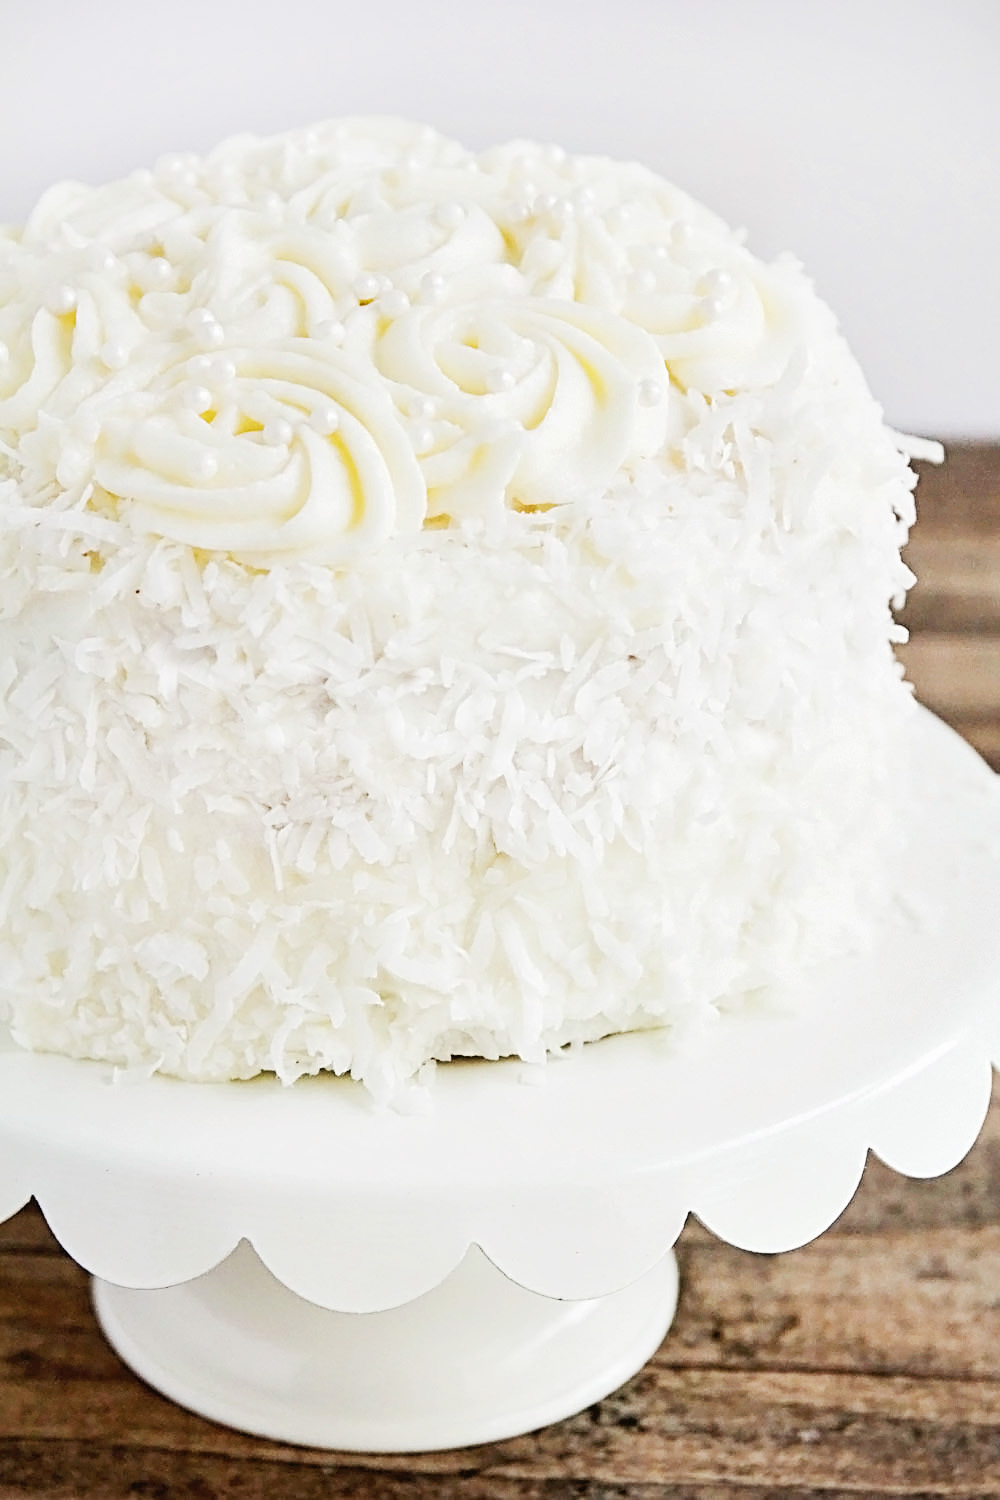 This elegant and delicious coconut layer cake is simple to make and always a favorite!